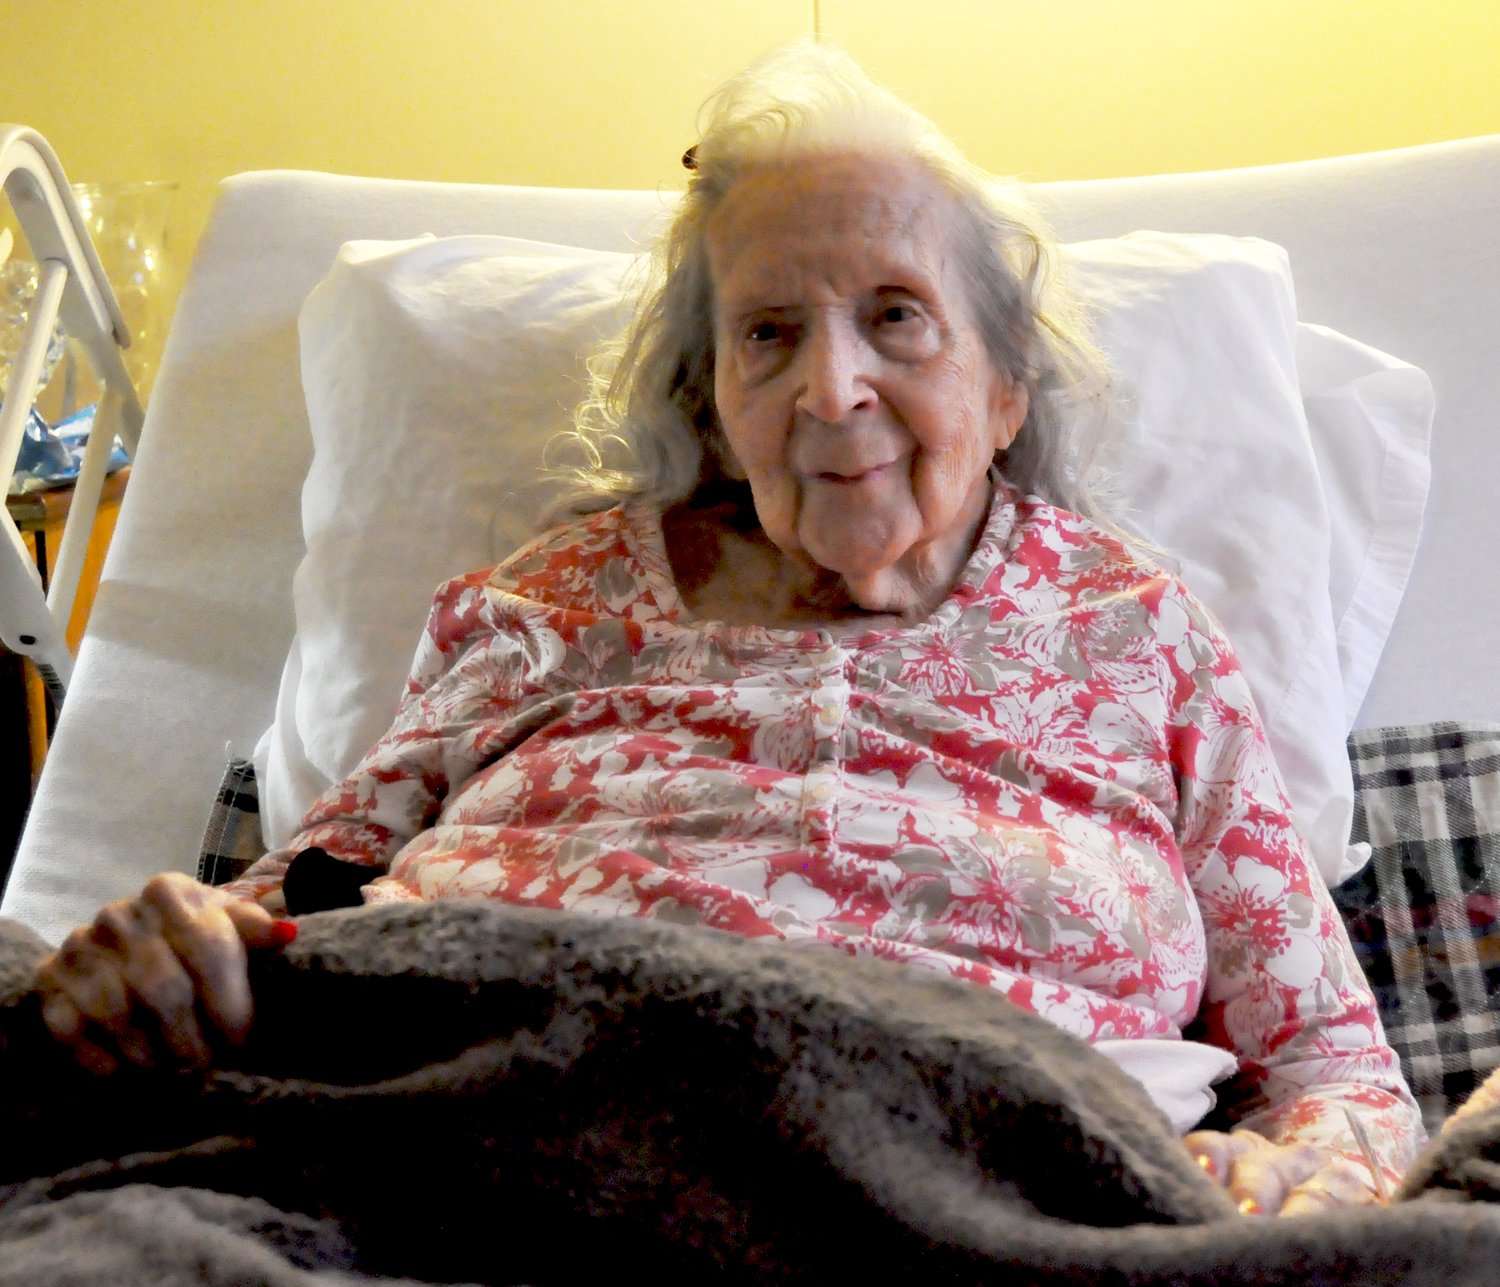 Helen Milligan, 103, has a birthday coming up on November 21. Milligan was reminiscing her life and telling stories from her past.